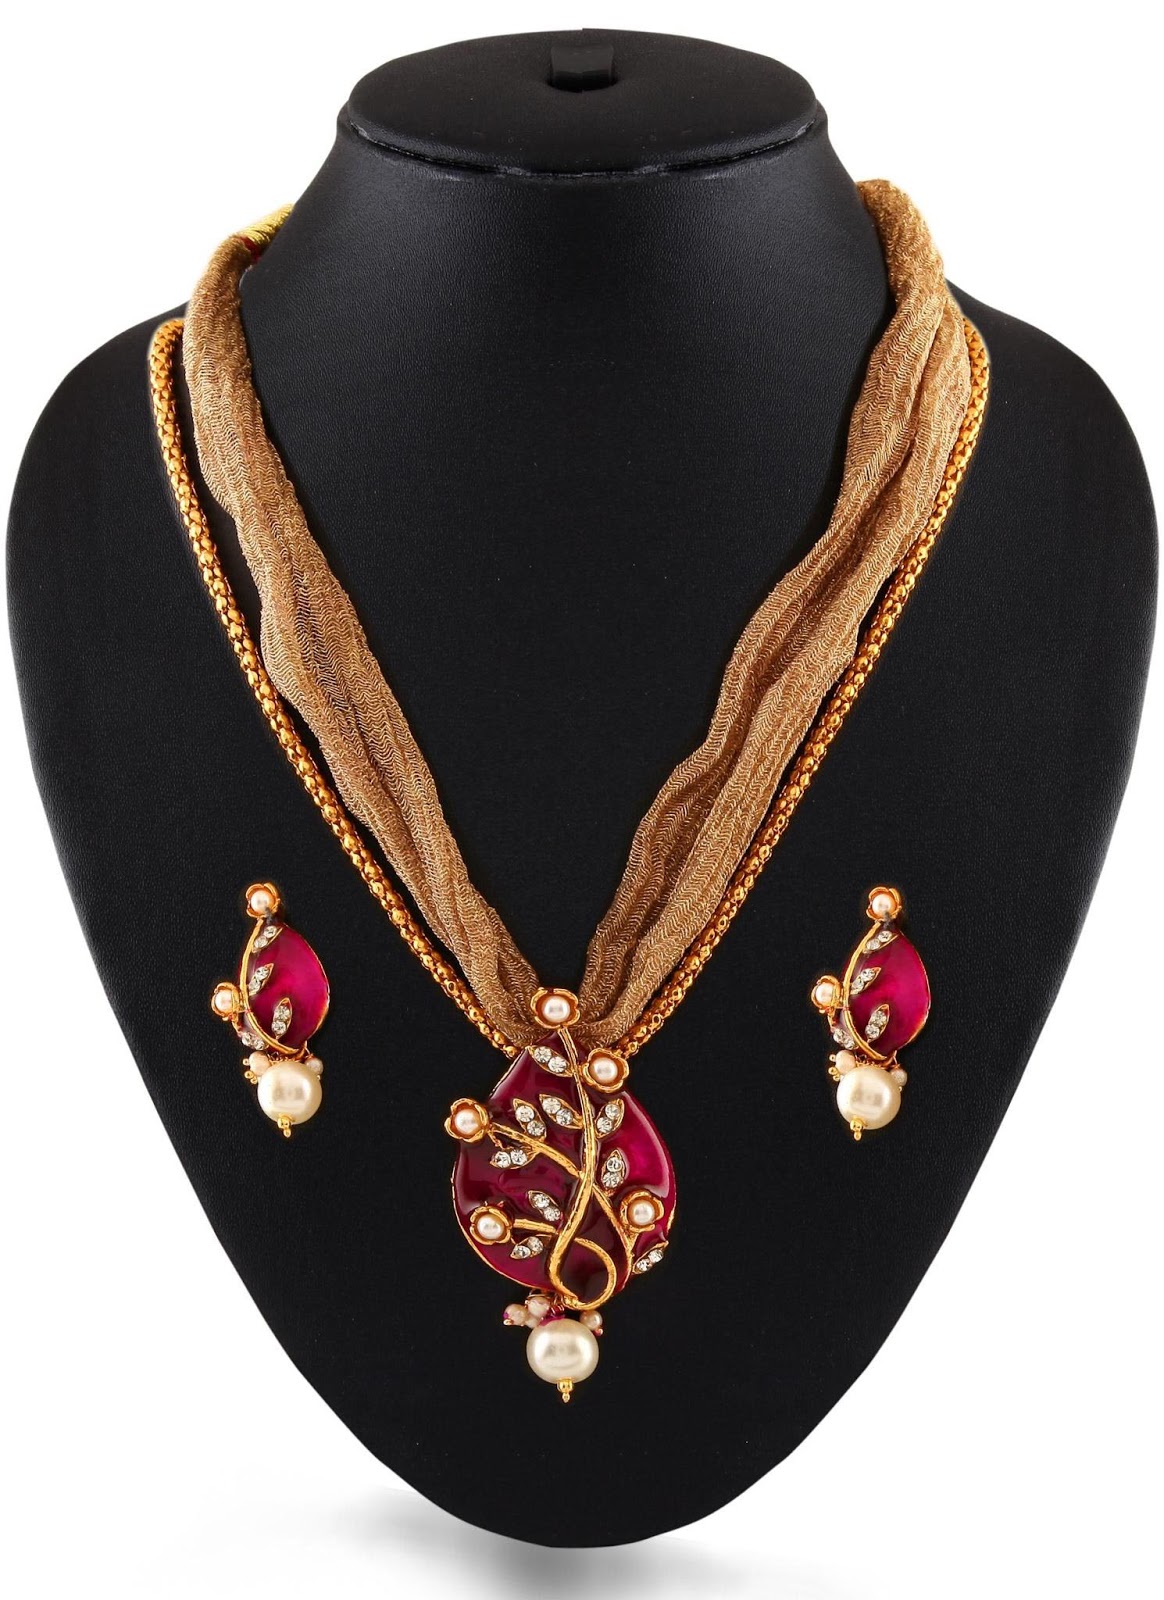 Everything for Women Fashion: 10+ Latest Indian Jewellery Designs